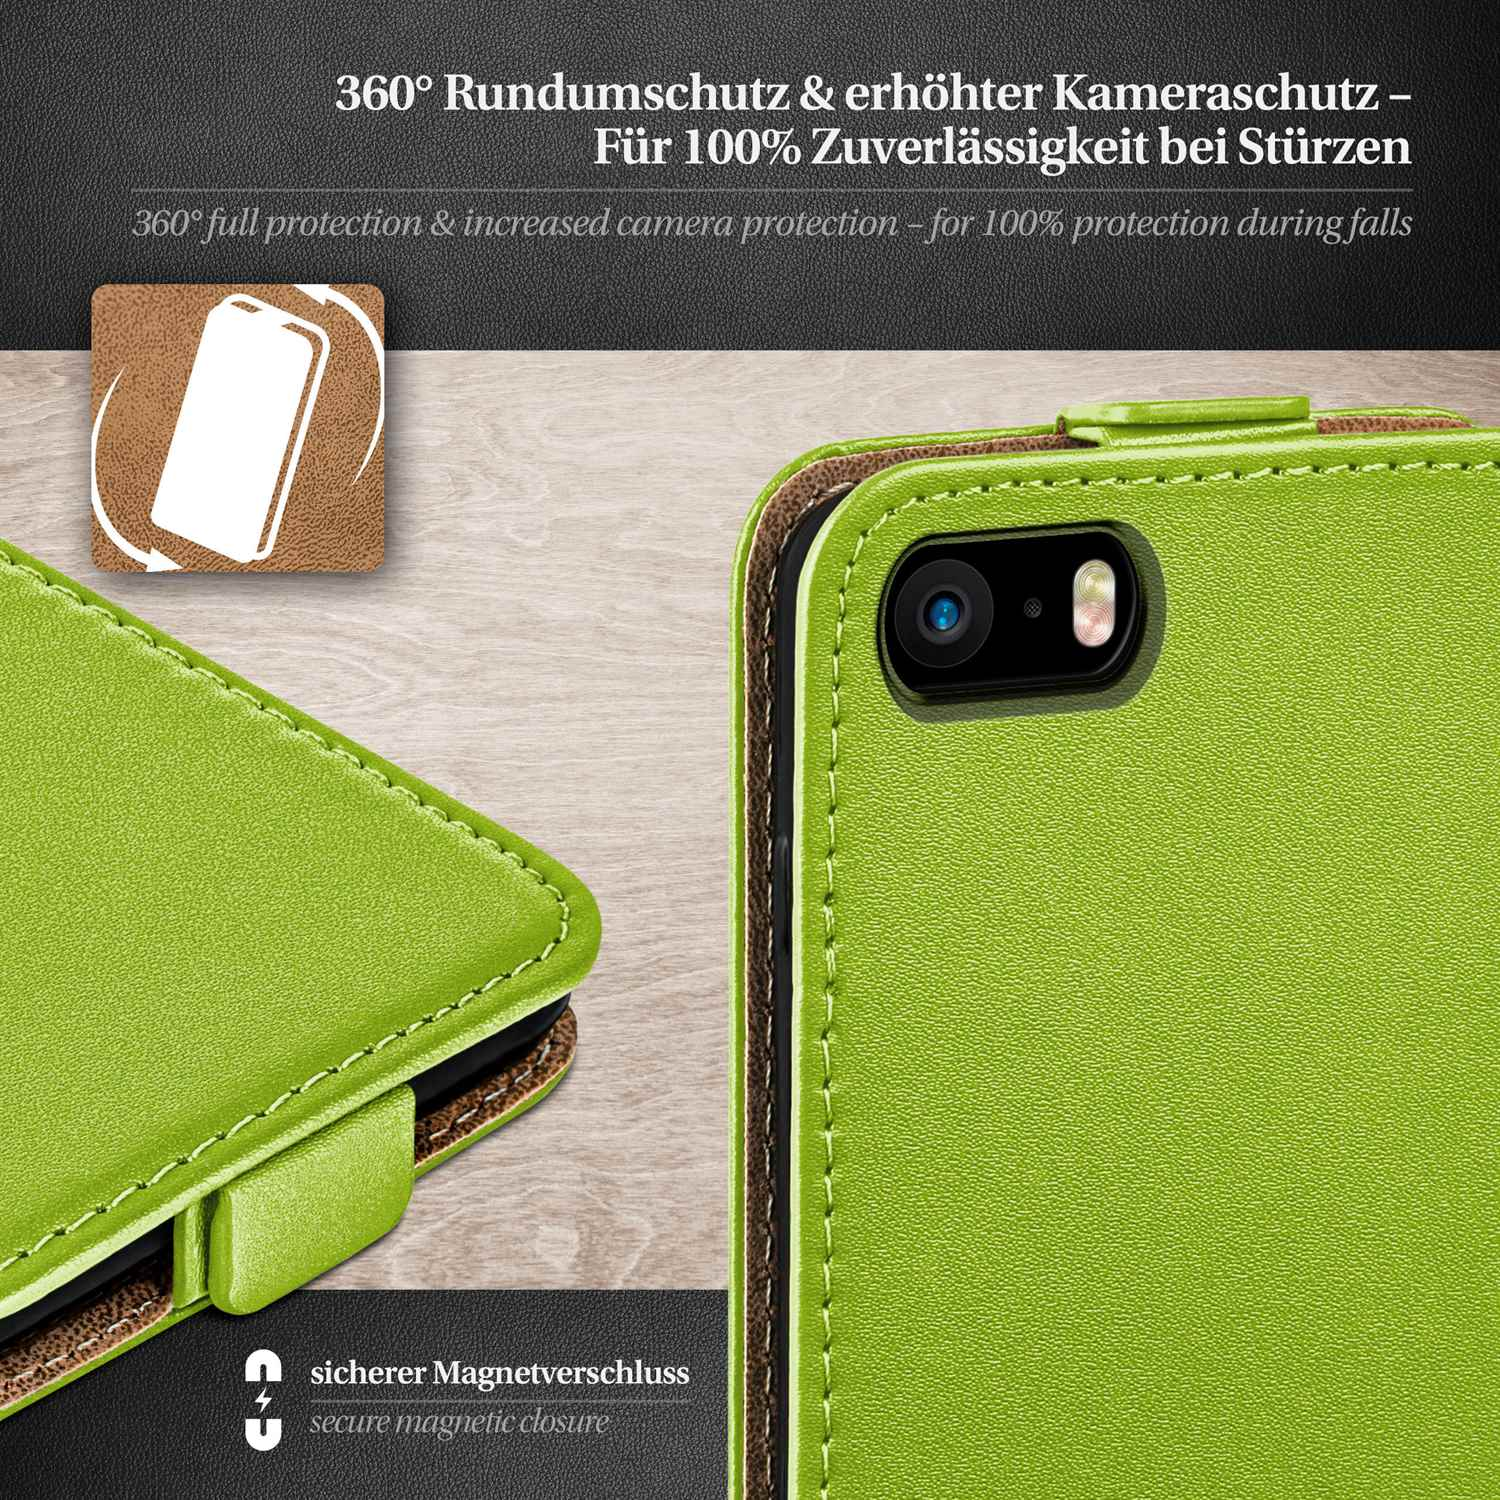 iPhone Cover, 5s, MOEX Apple, Lime-Green Flip Case, Flip